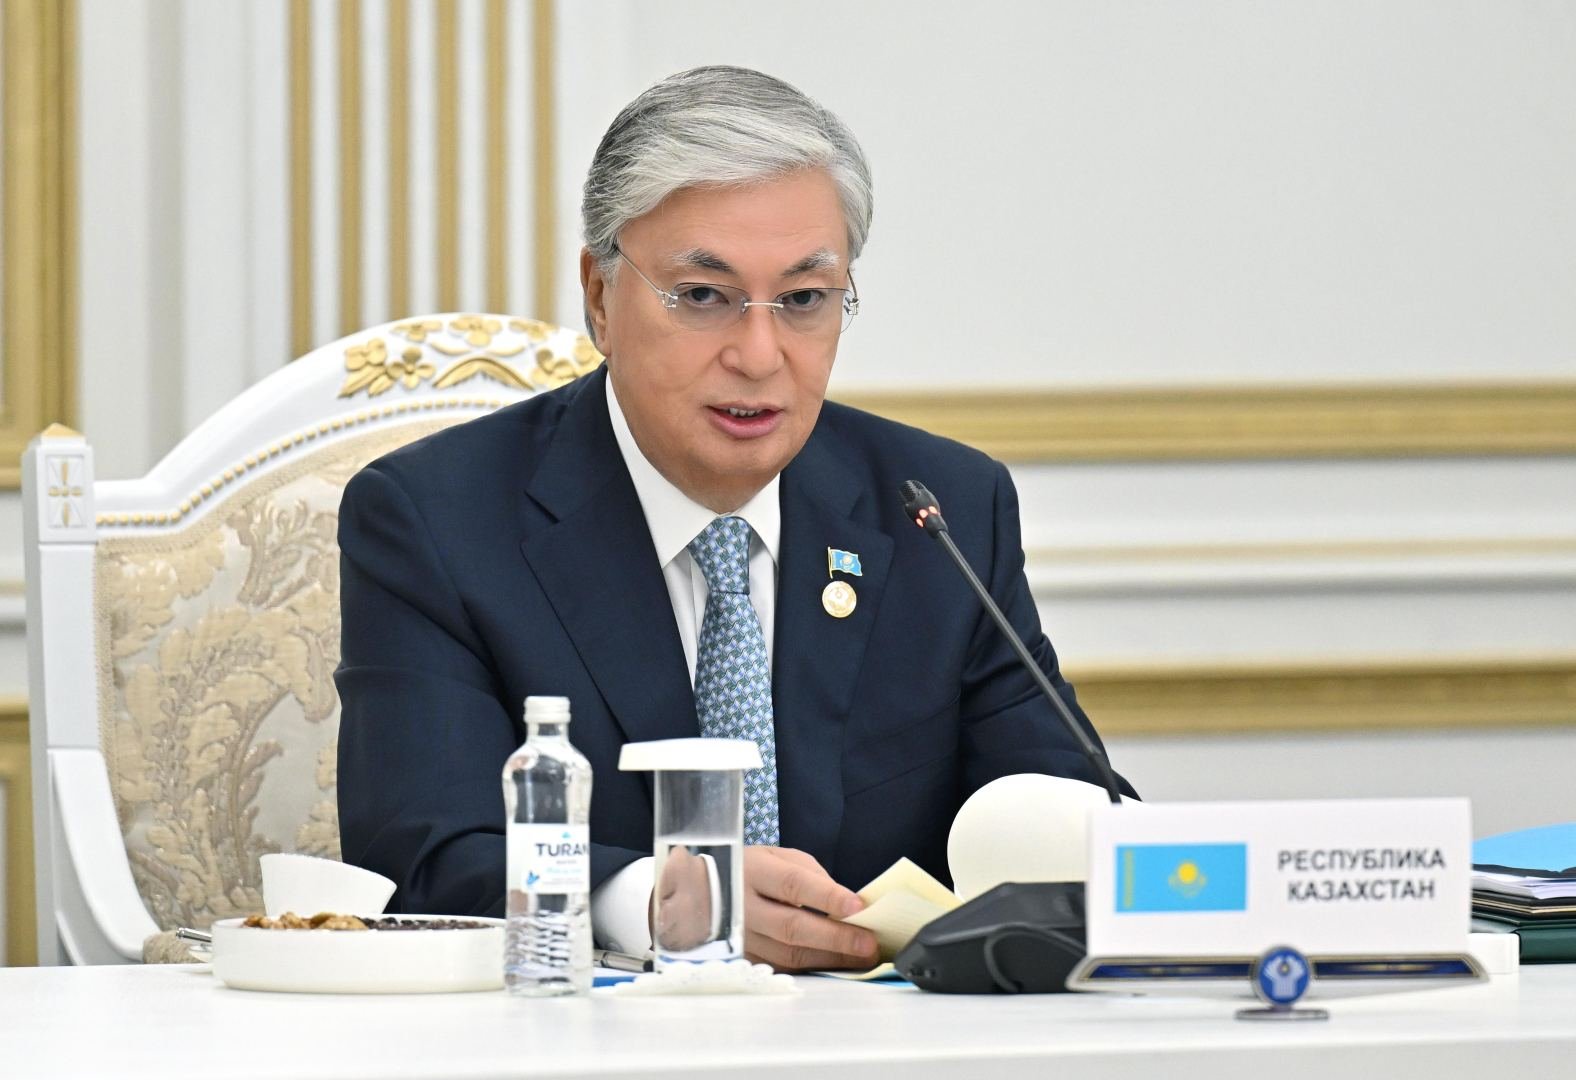 Baku holds official welcome ceremony for President Kassym-Jomart Tokayev